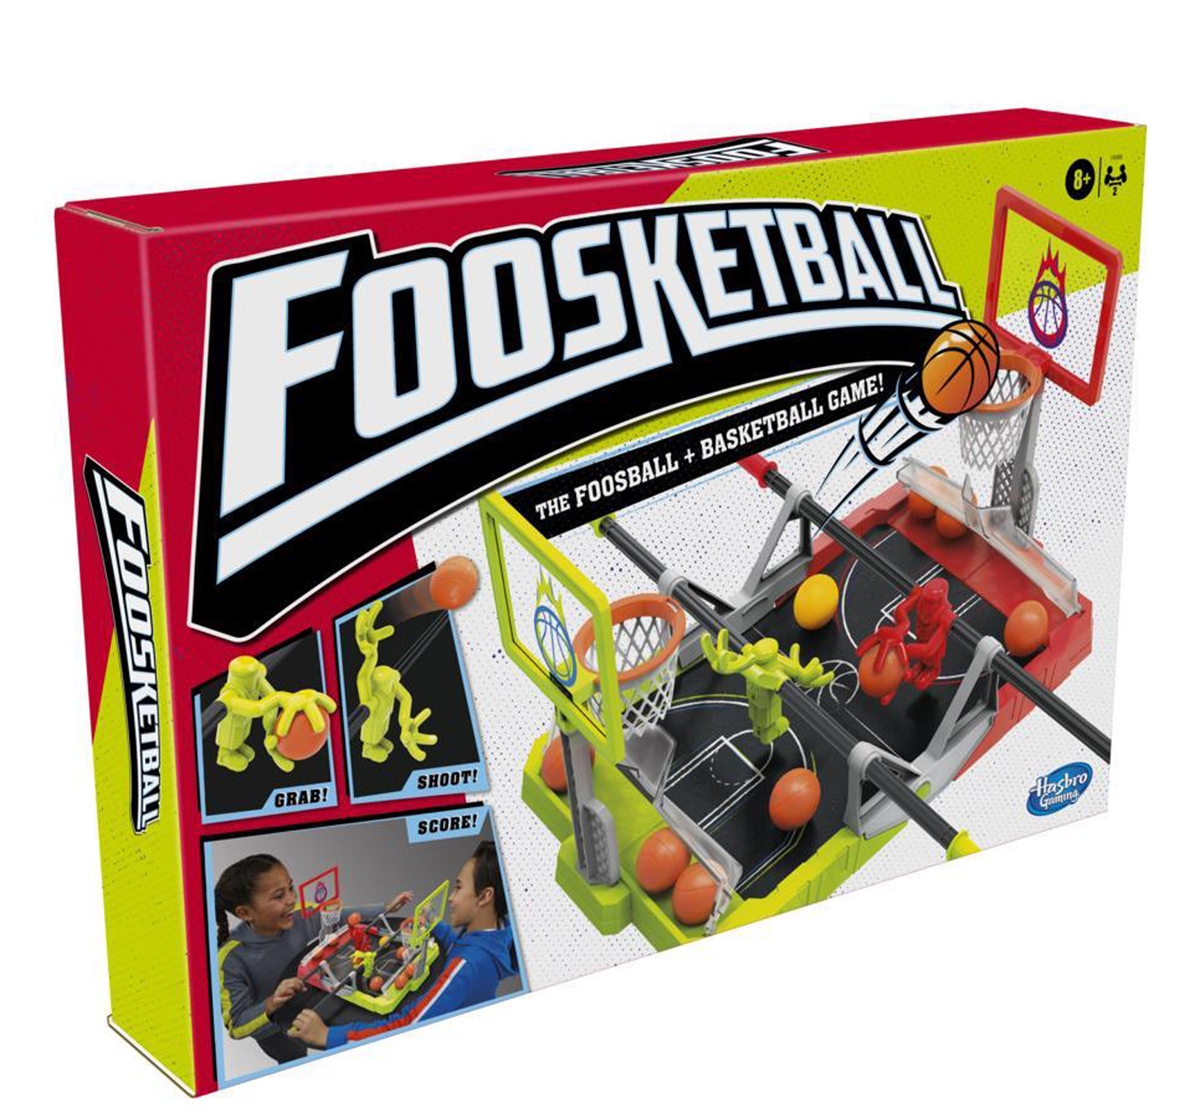 Hasbro Gaming Foosketball Game for Kids 8Y+, Multicolour